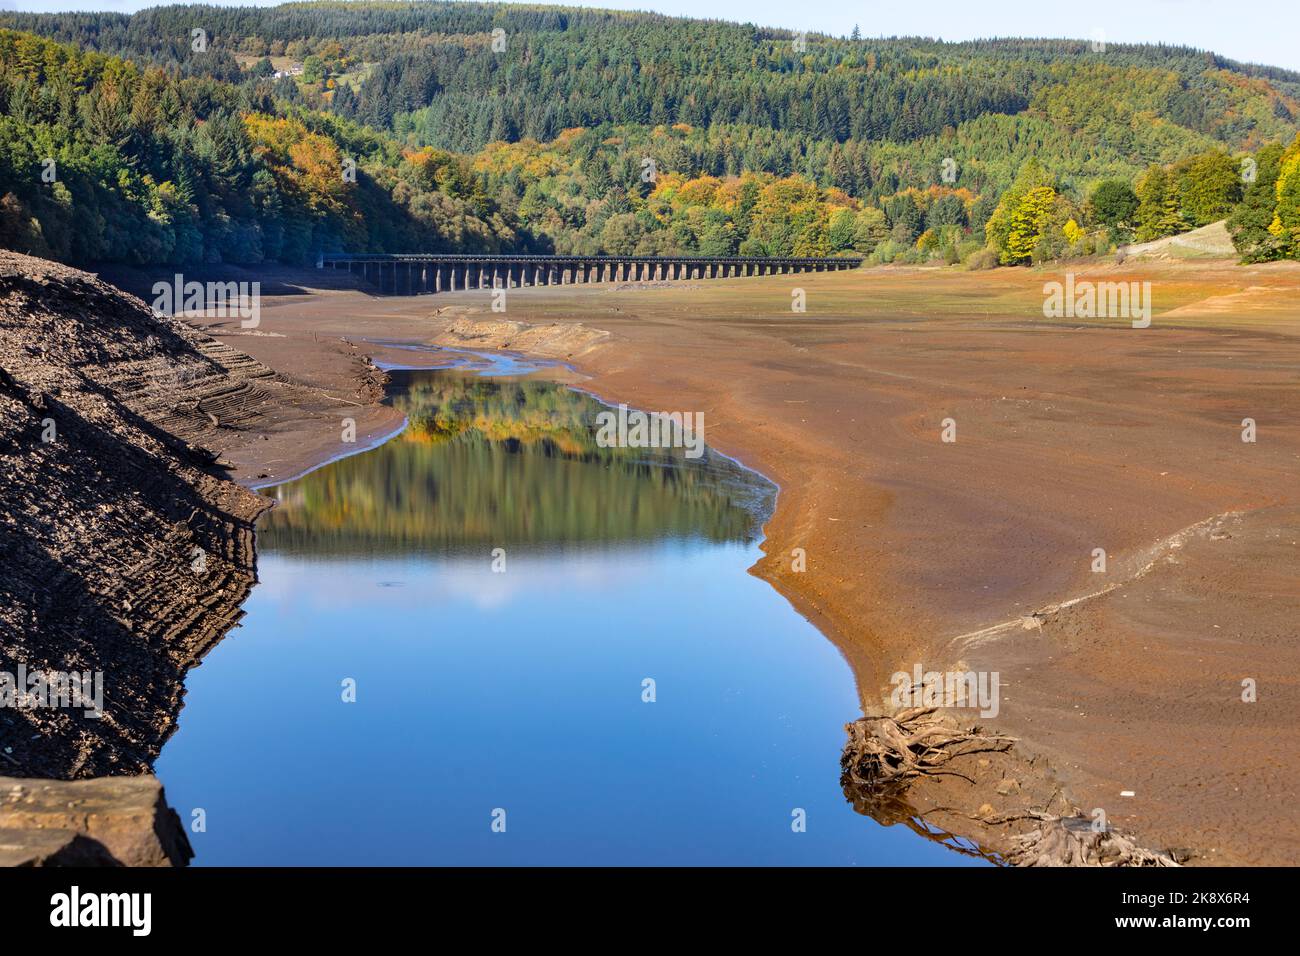 An almost empty Ladybower reservoir in The Peak District of Derbyshire. Stock Photo